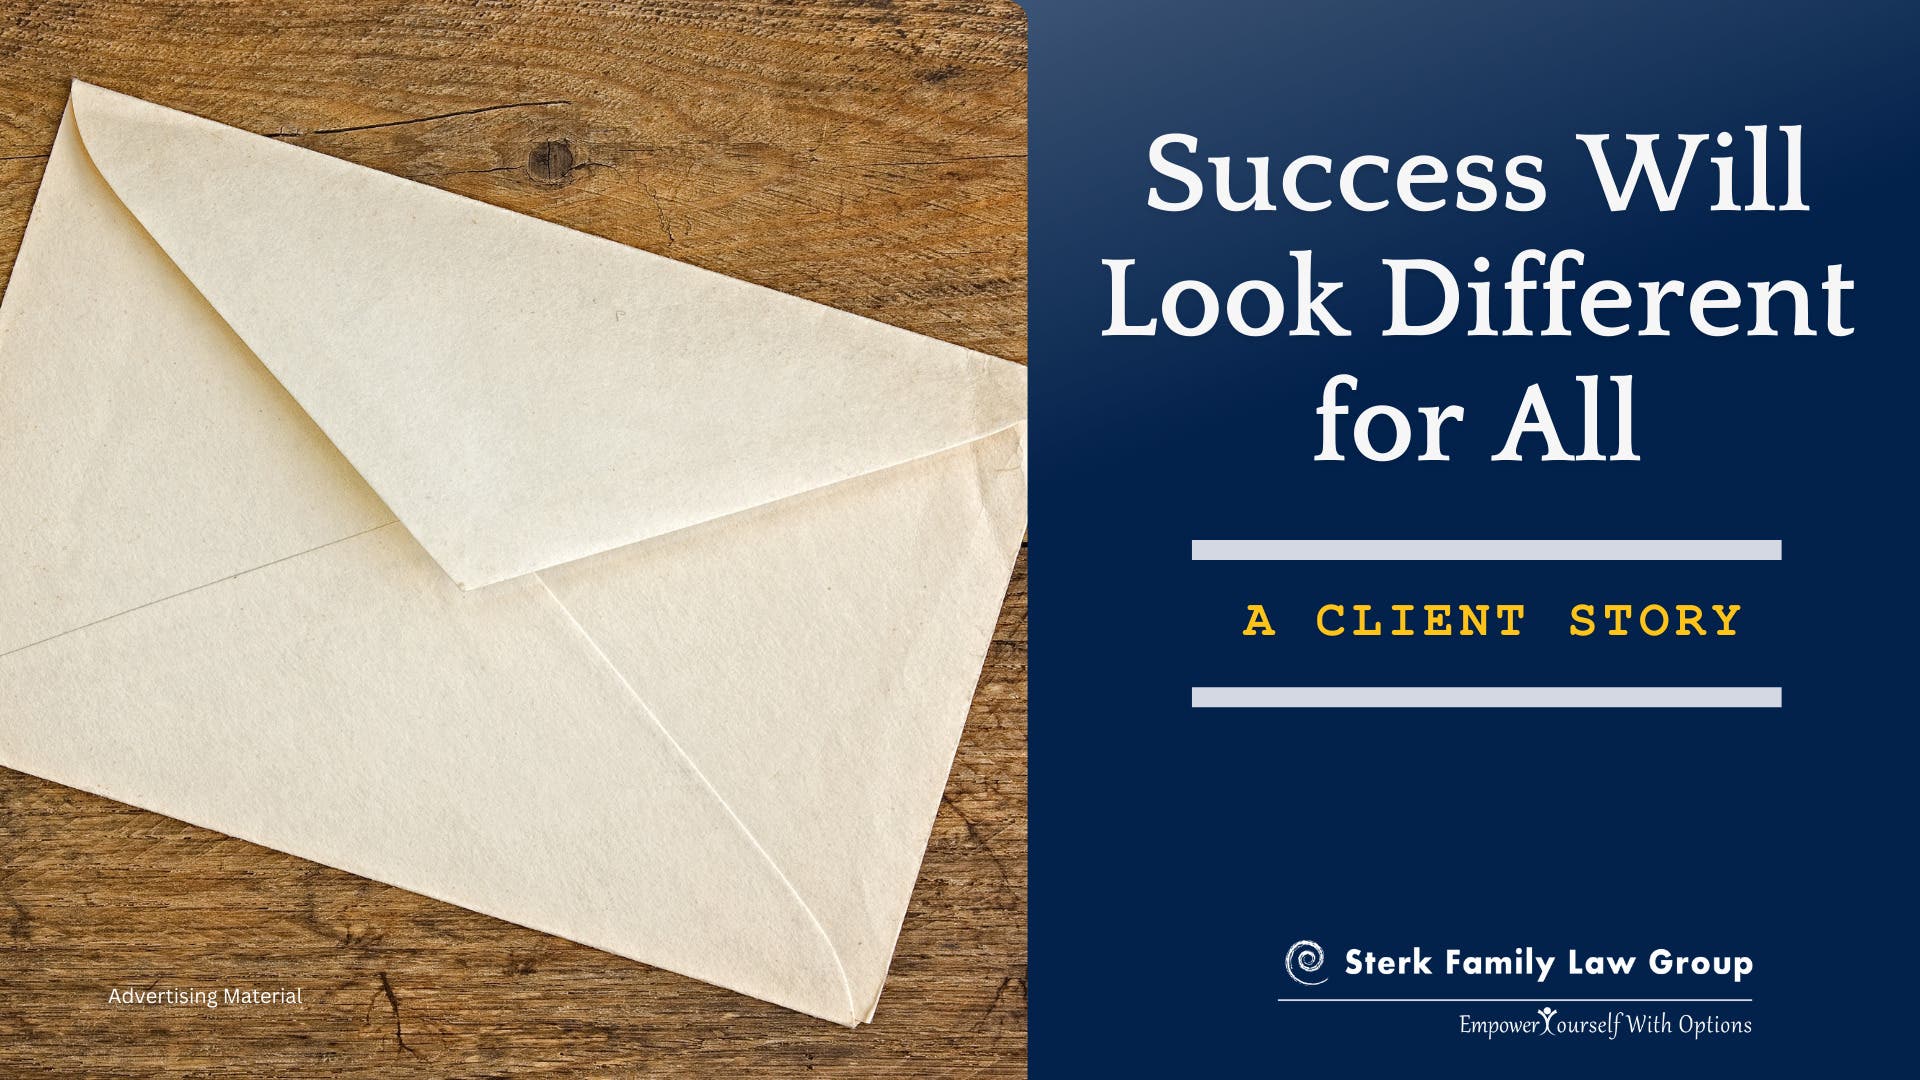 Helpful Hints from Sterk Family Law Group: Success Will Look Different for All